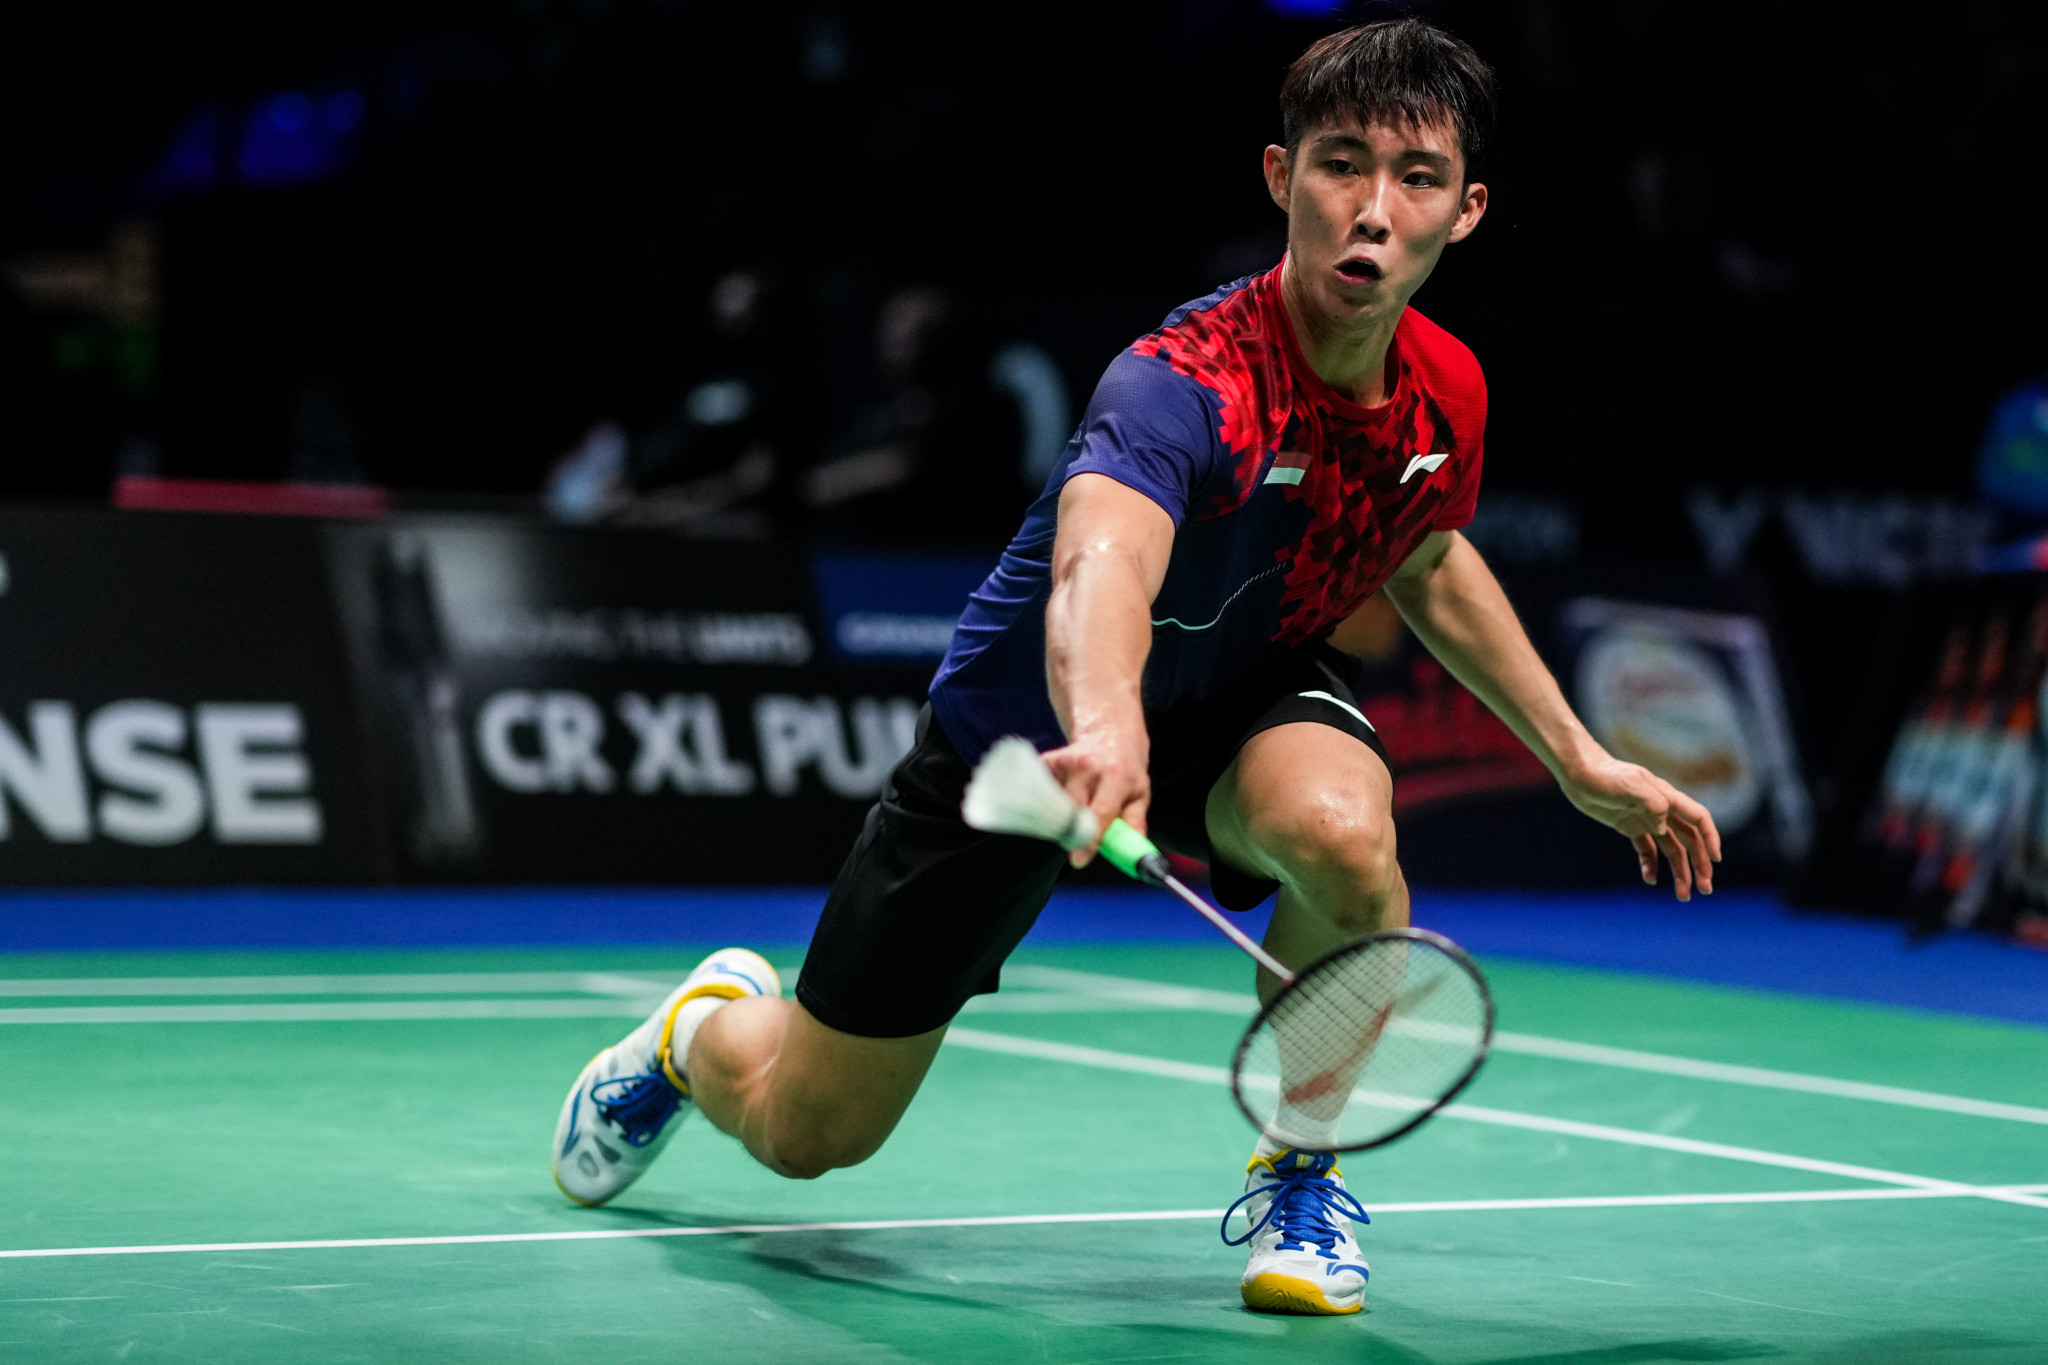 Singapore's Loh Kean Yew overcame Kento Momota in the second round of the Indonesian Open in Bali ©Getty Images